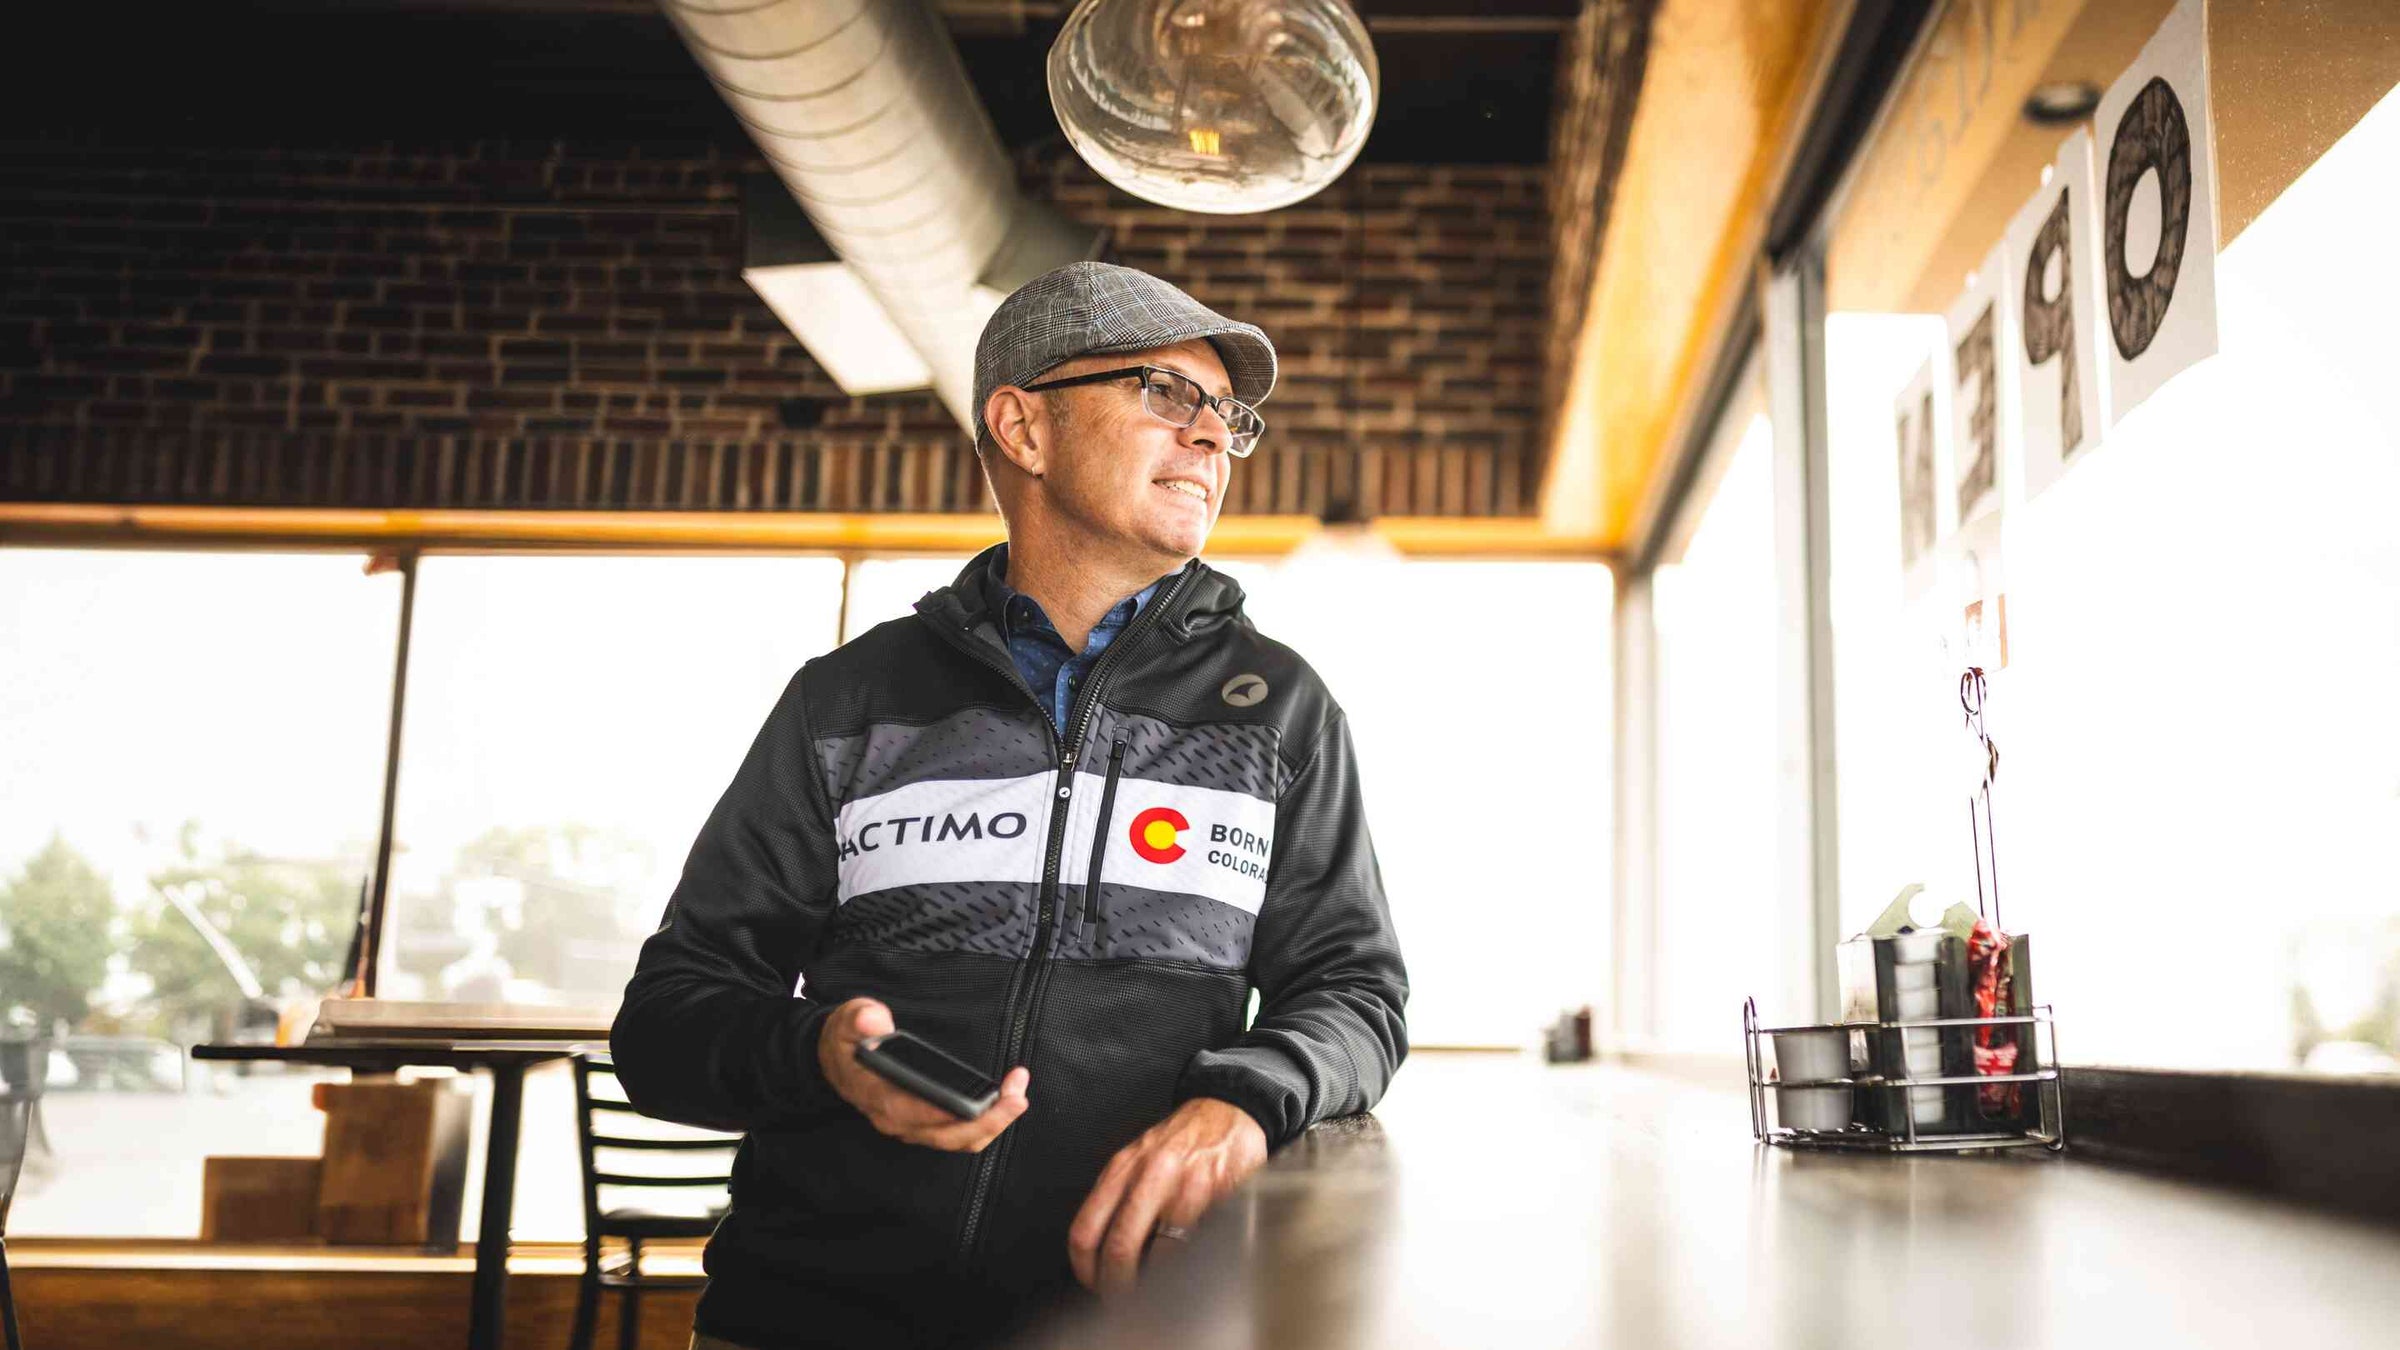 Custom Off-Bike Clothing from Pactimo